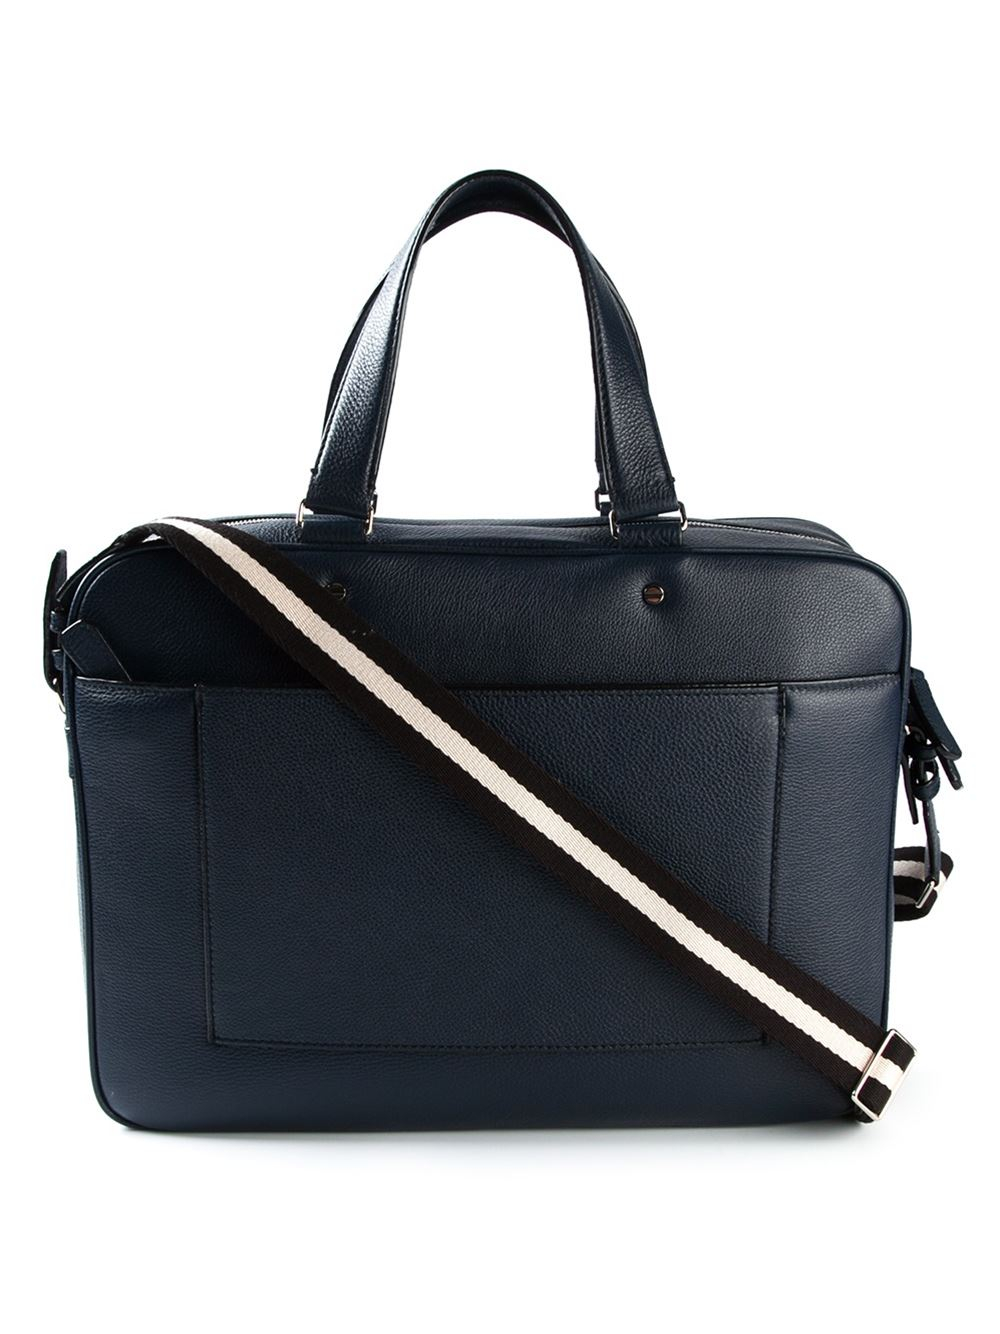 Bally Square Tote Bag in Blue - Lyst